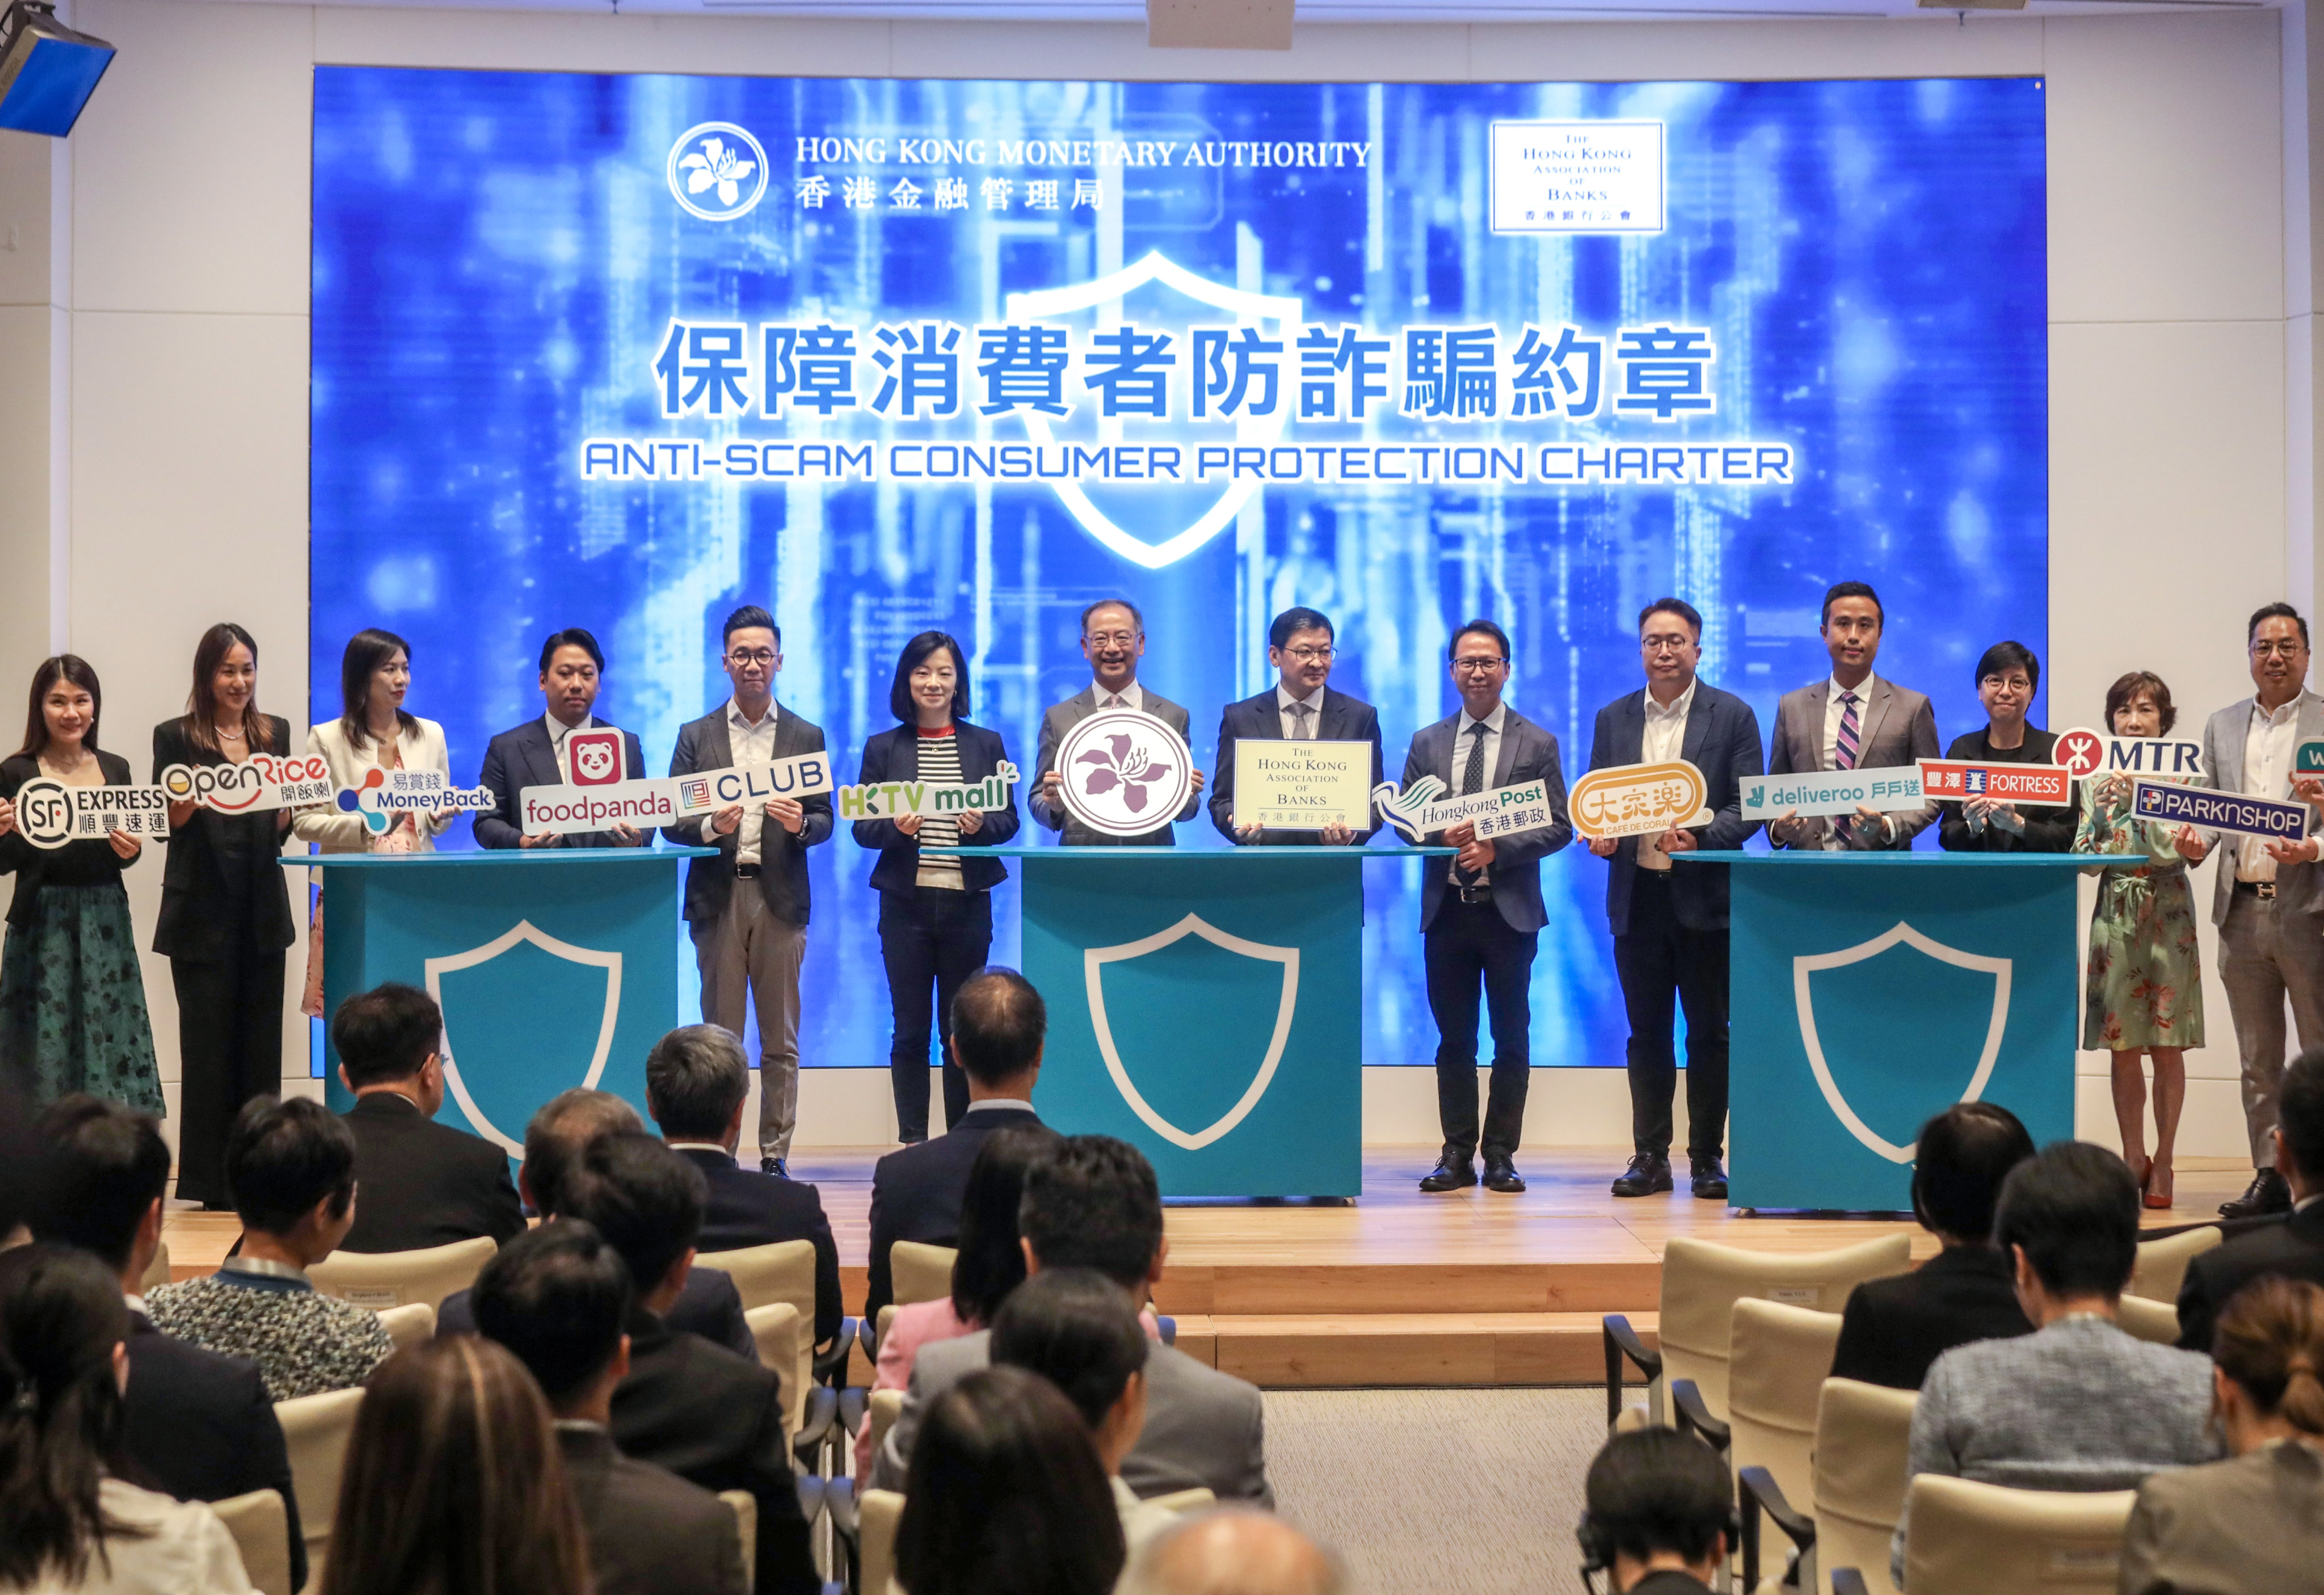 Signatories of the Anti-Scam Consumer Protection Charter appear together at a press conference in Central. Photo: Xiaomei Chen